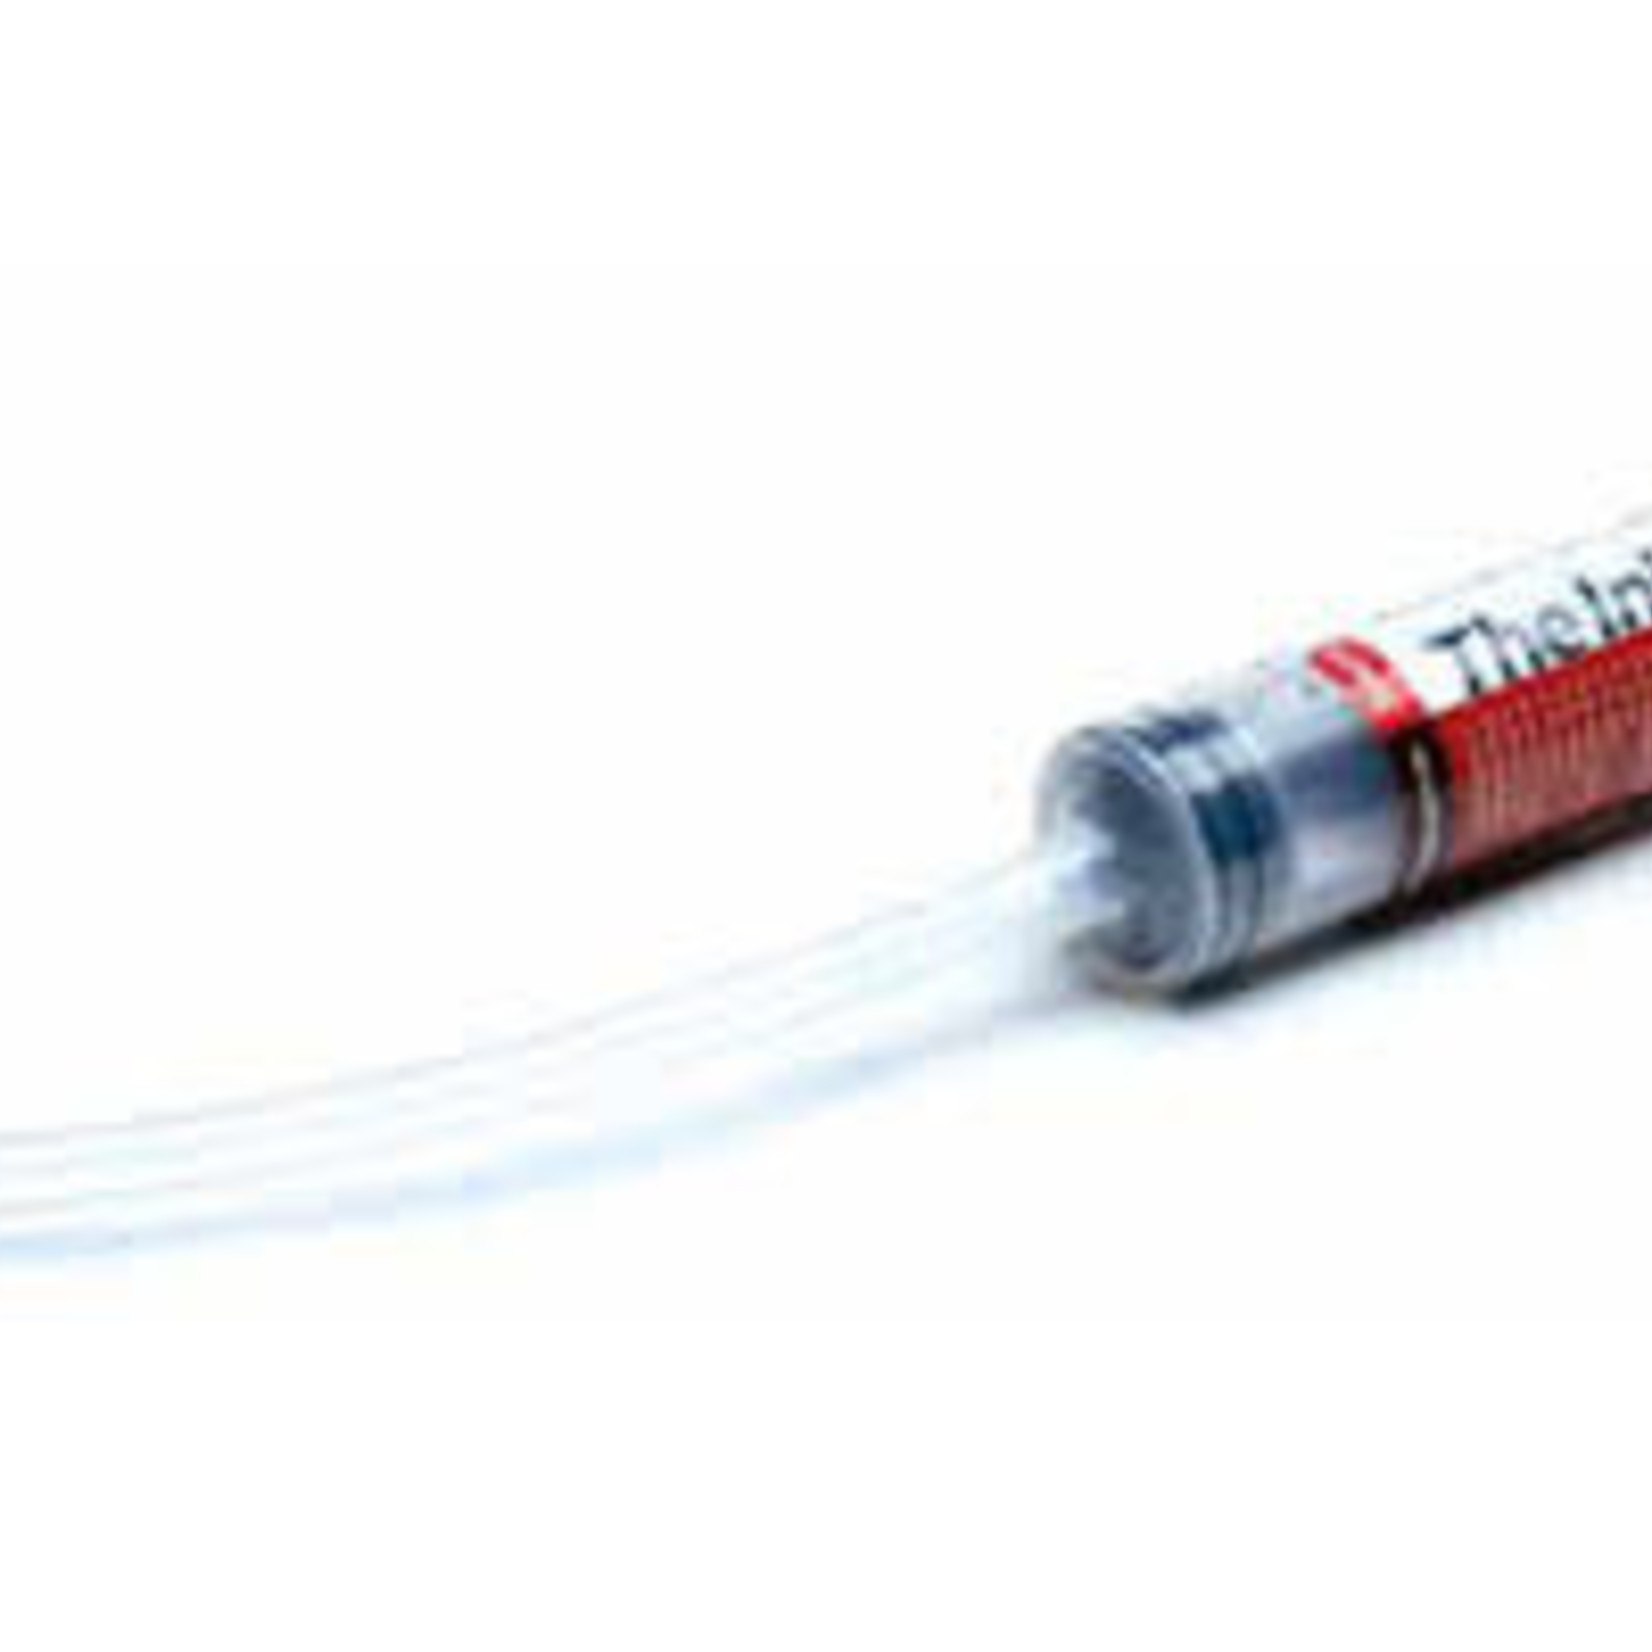 NT TIRE SEALANT INJECTOR